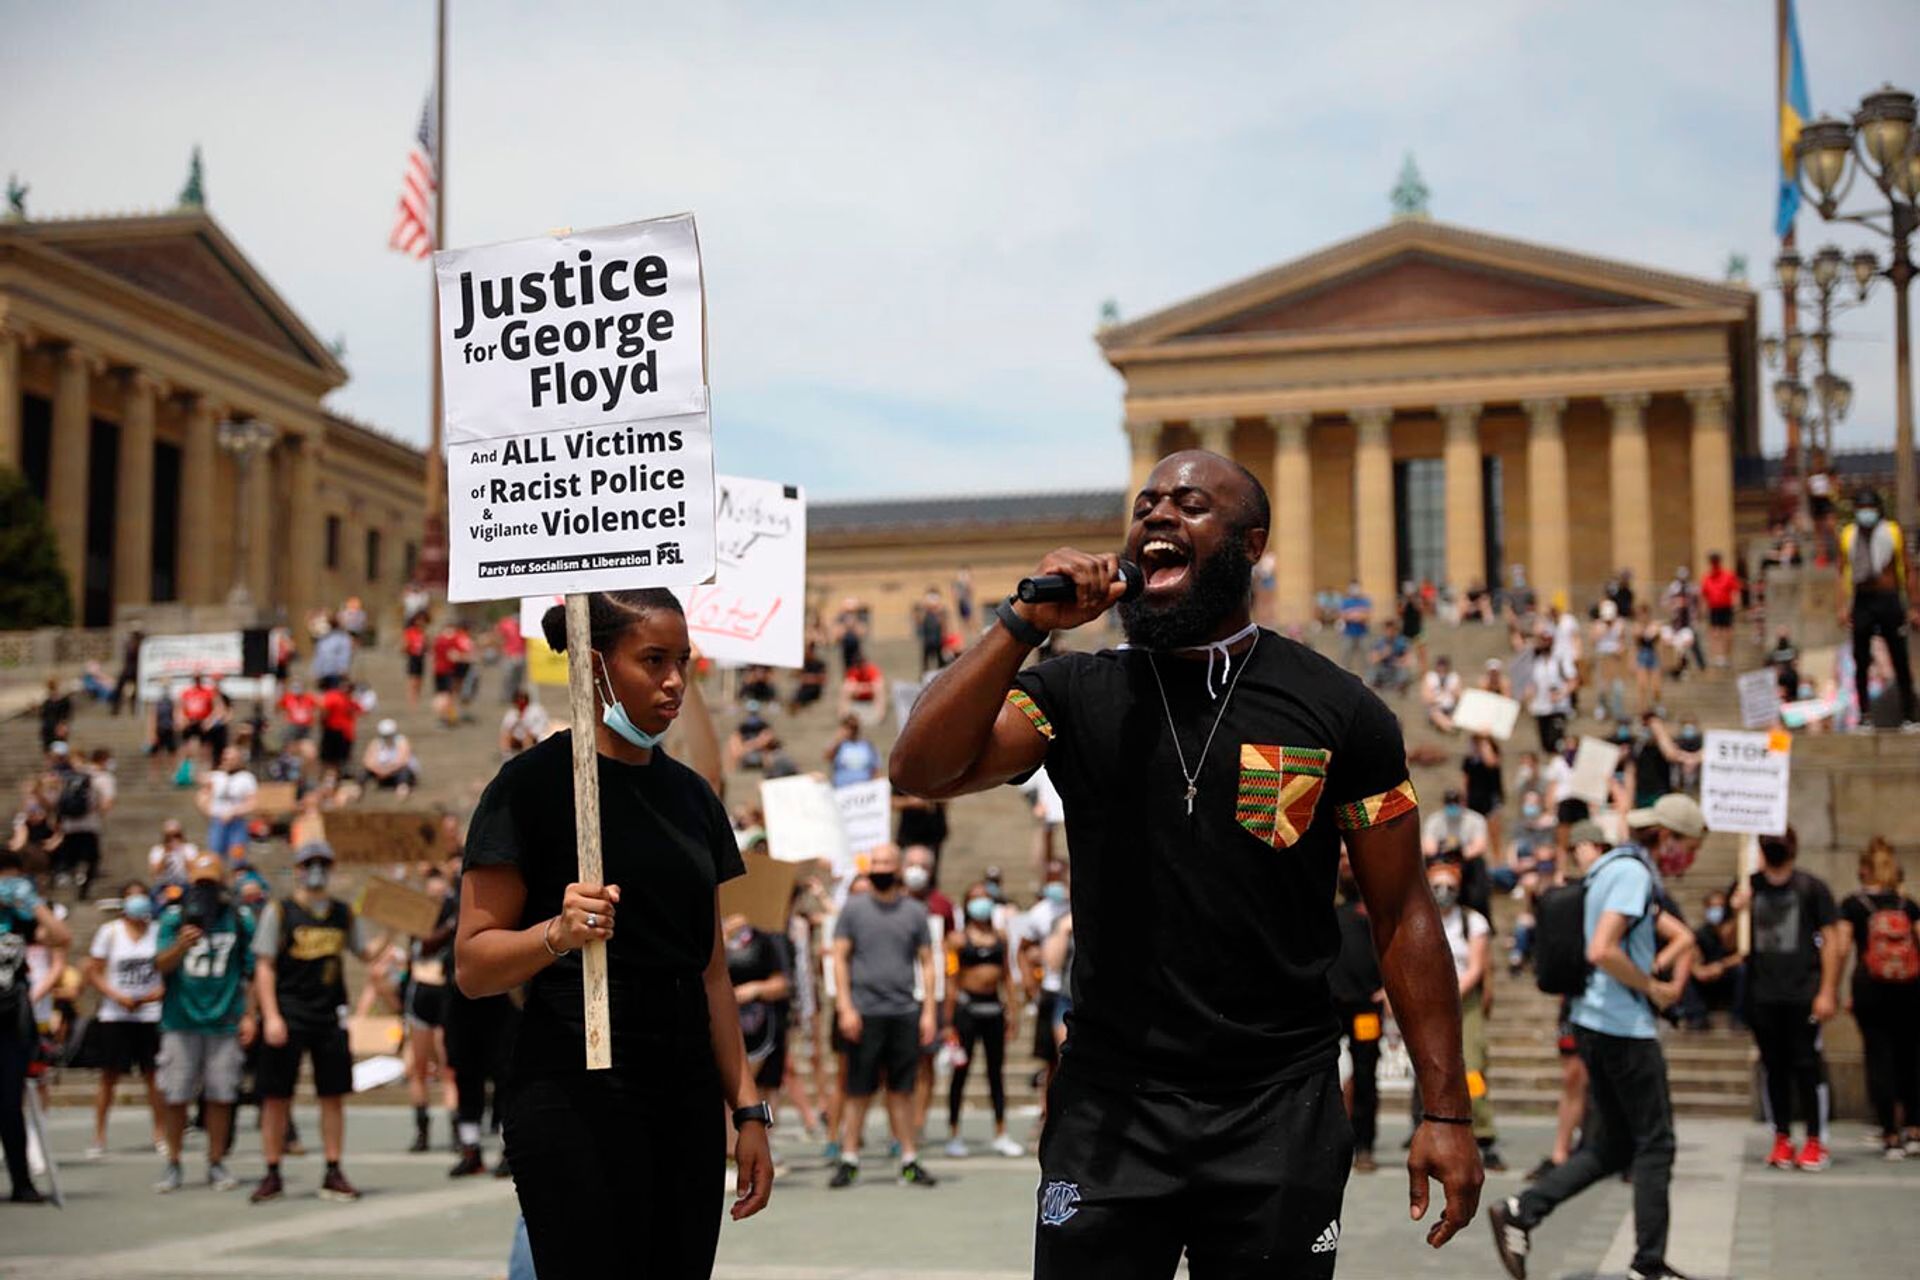 A protest at the Philadelphia Museum of Art over the weekend related to the national movement promoting racial justice. The museum meanwhile faces a union organising effort by its employees. Tyger Williams/The Philadelphia Inquirer via Associated Press